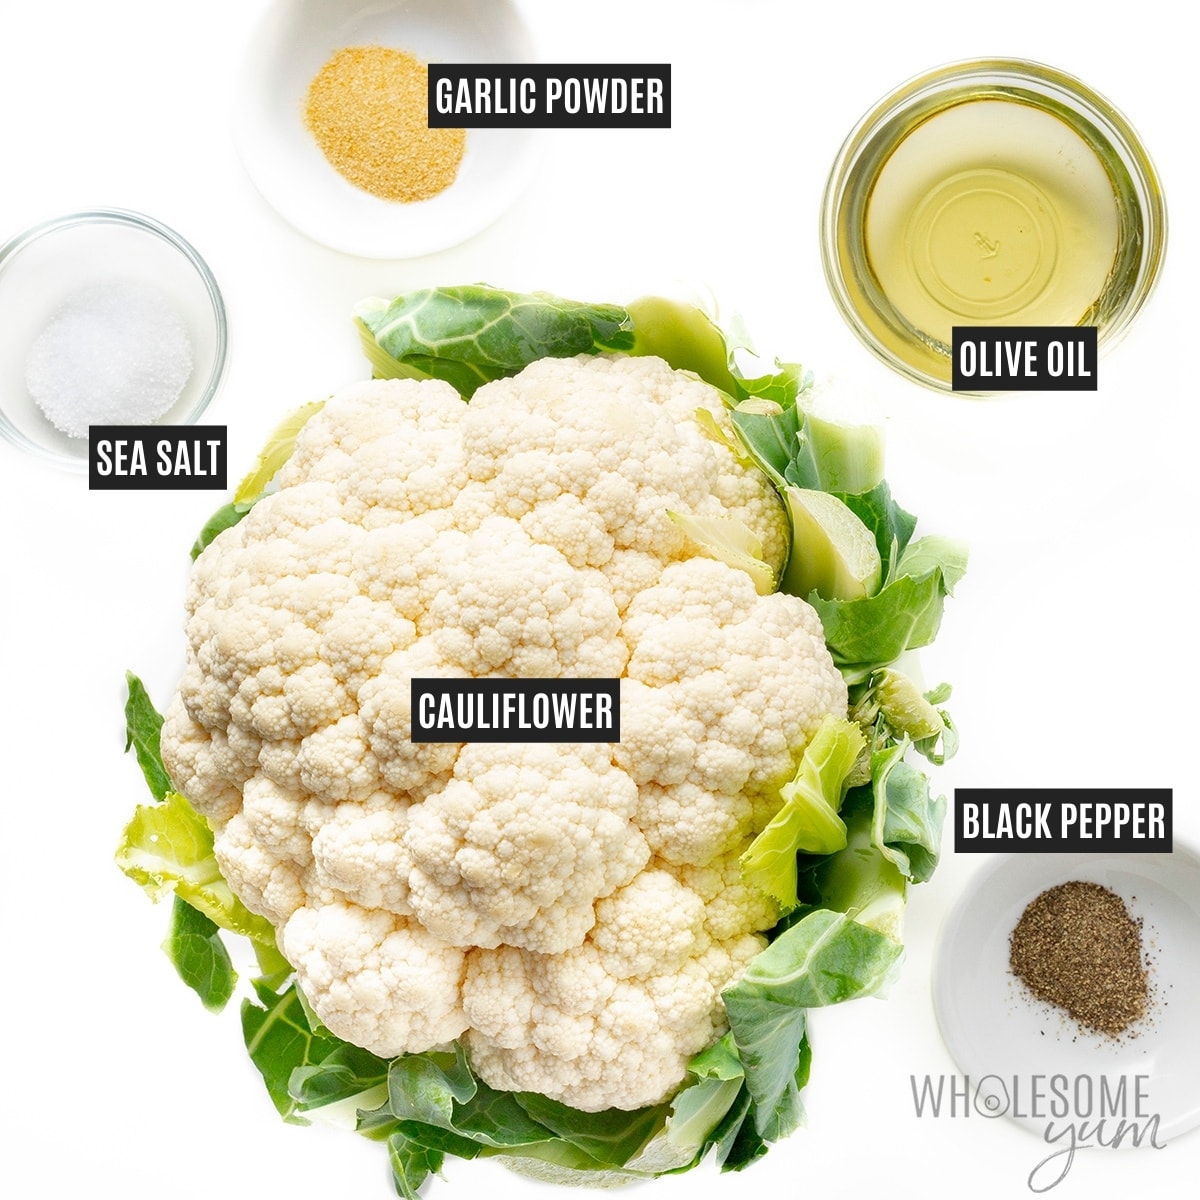 Head of cauliflower surrounded by oil and seasonings in small bowls.